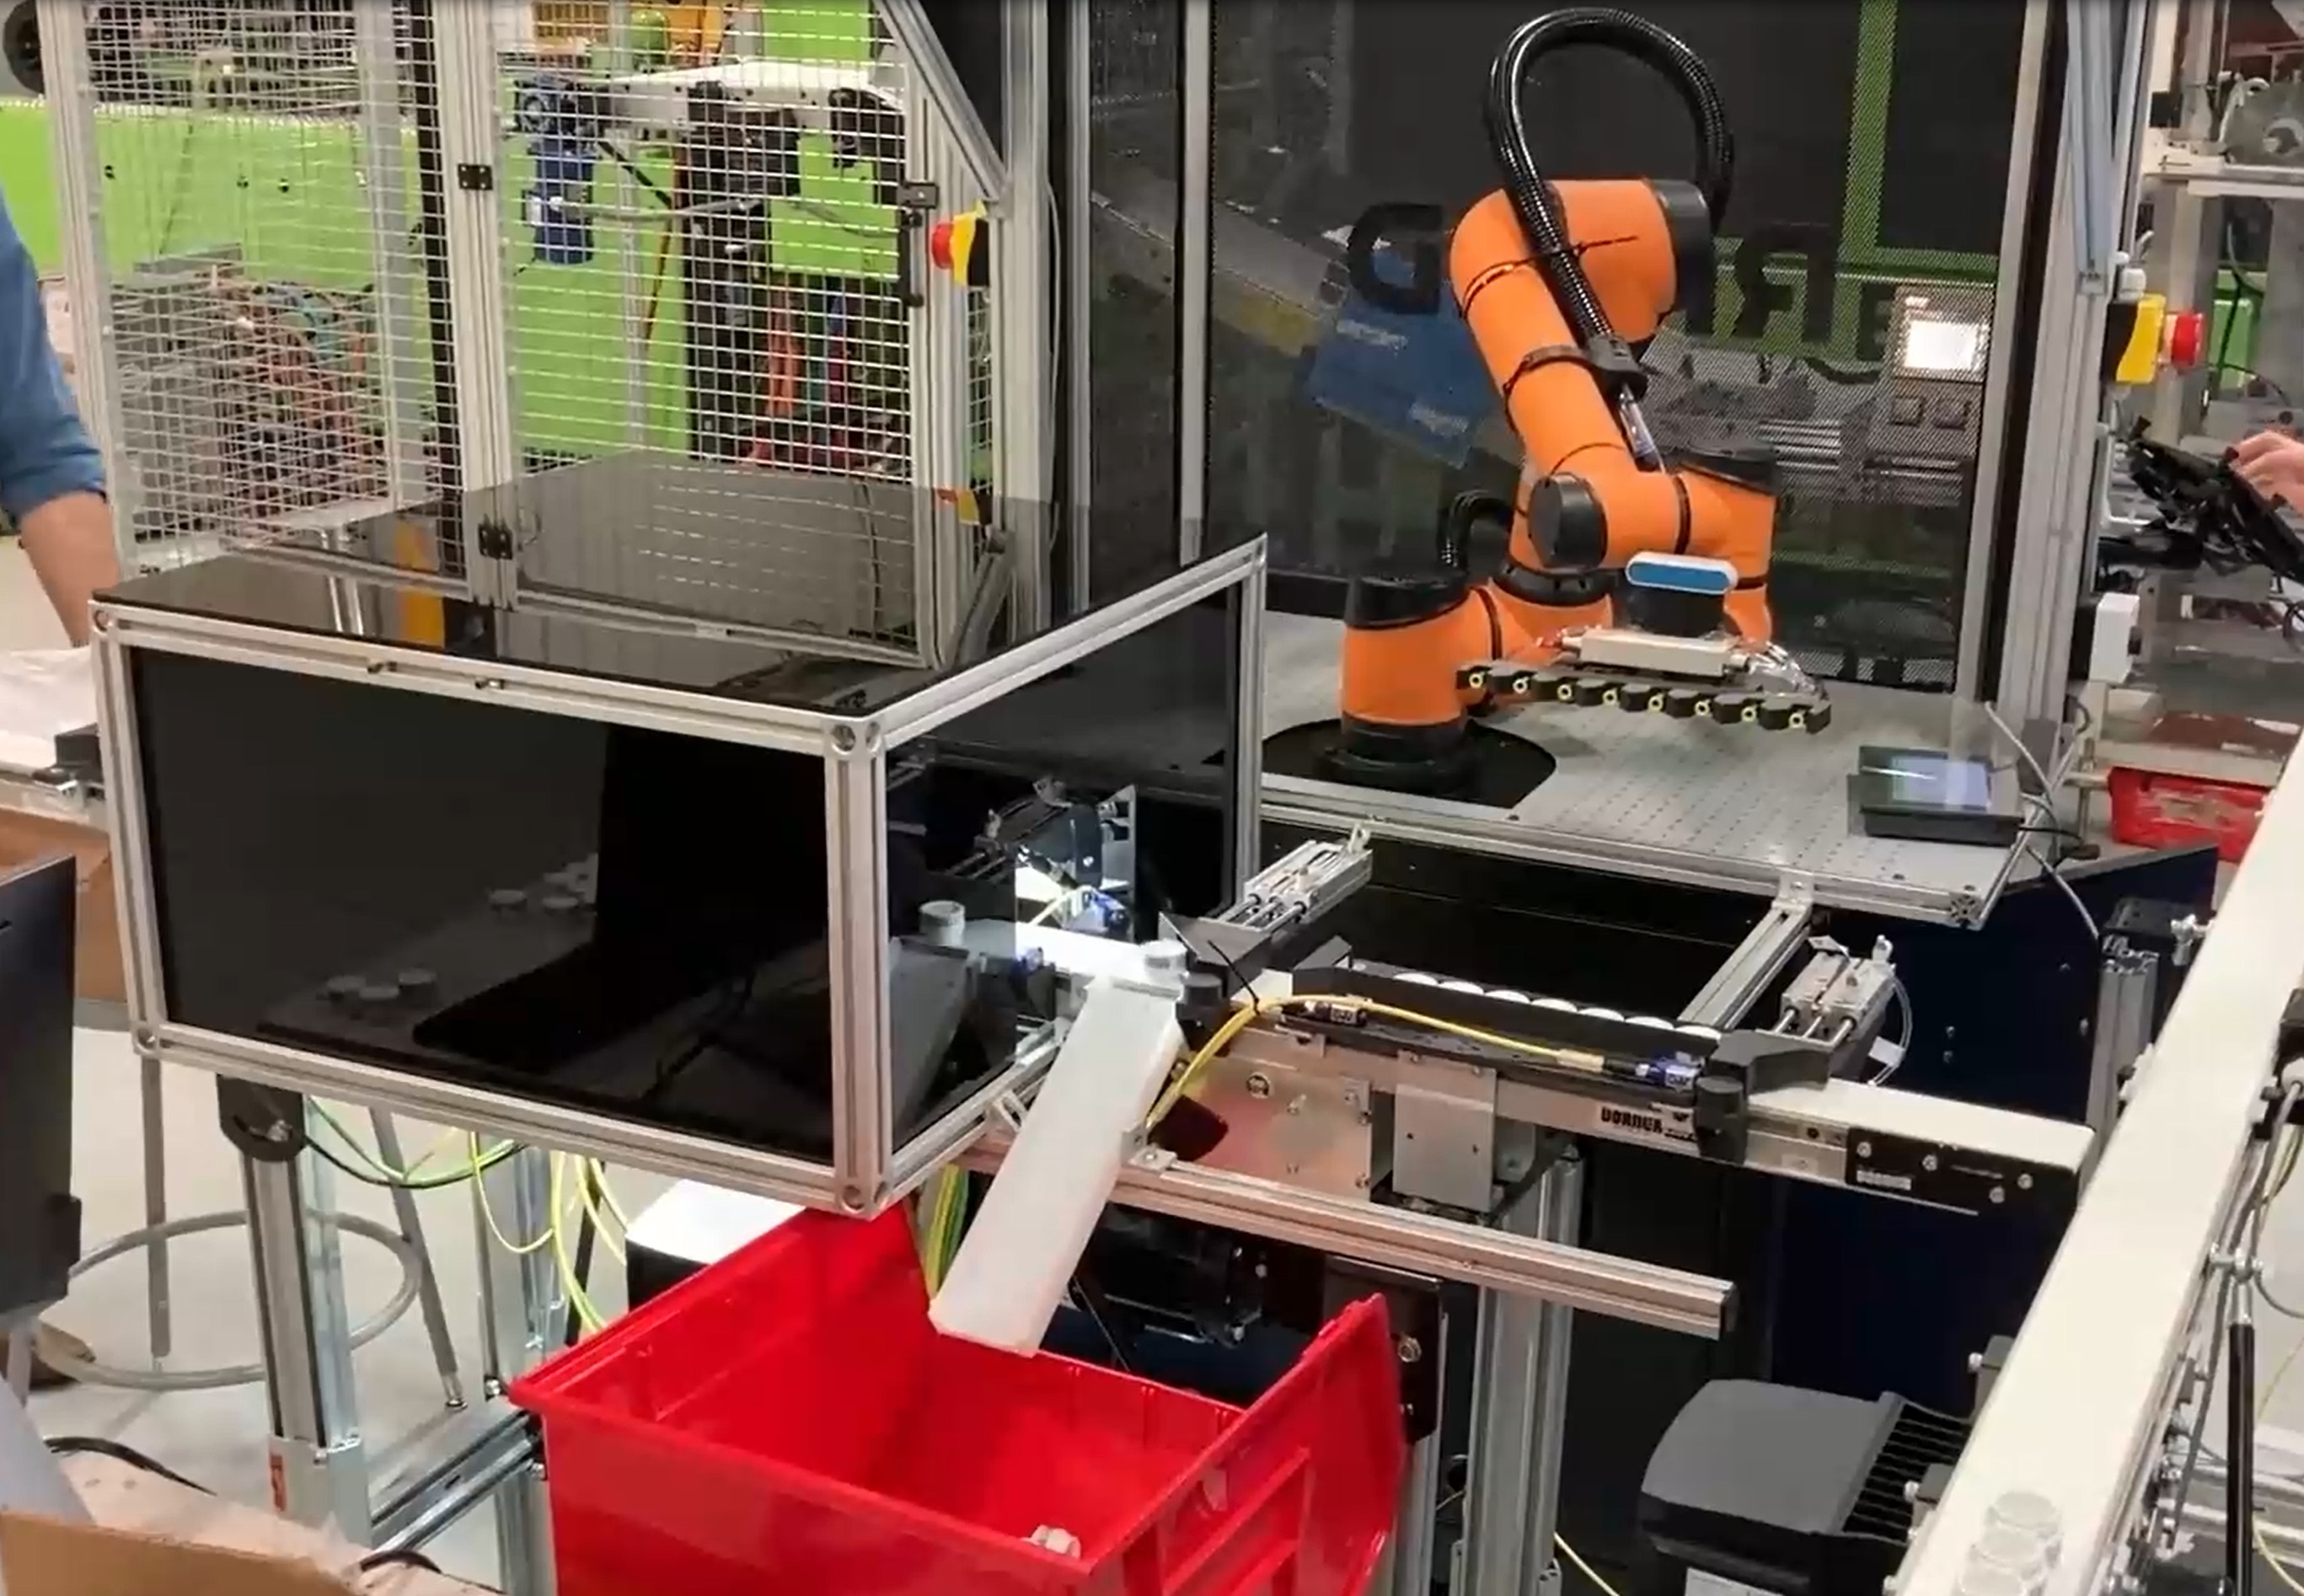 An orange robot with a horizontally oriented suction gripper waits to pick up product next to a polarized box where small jars are inspected by a camera system.